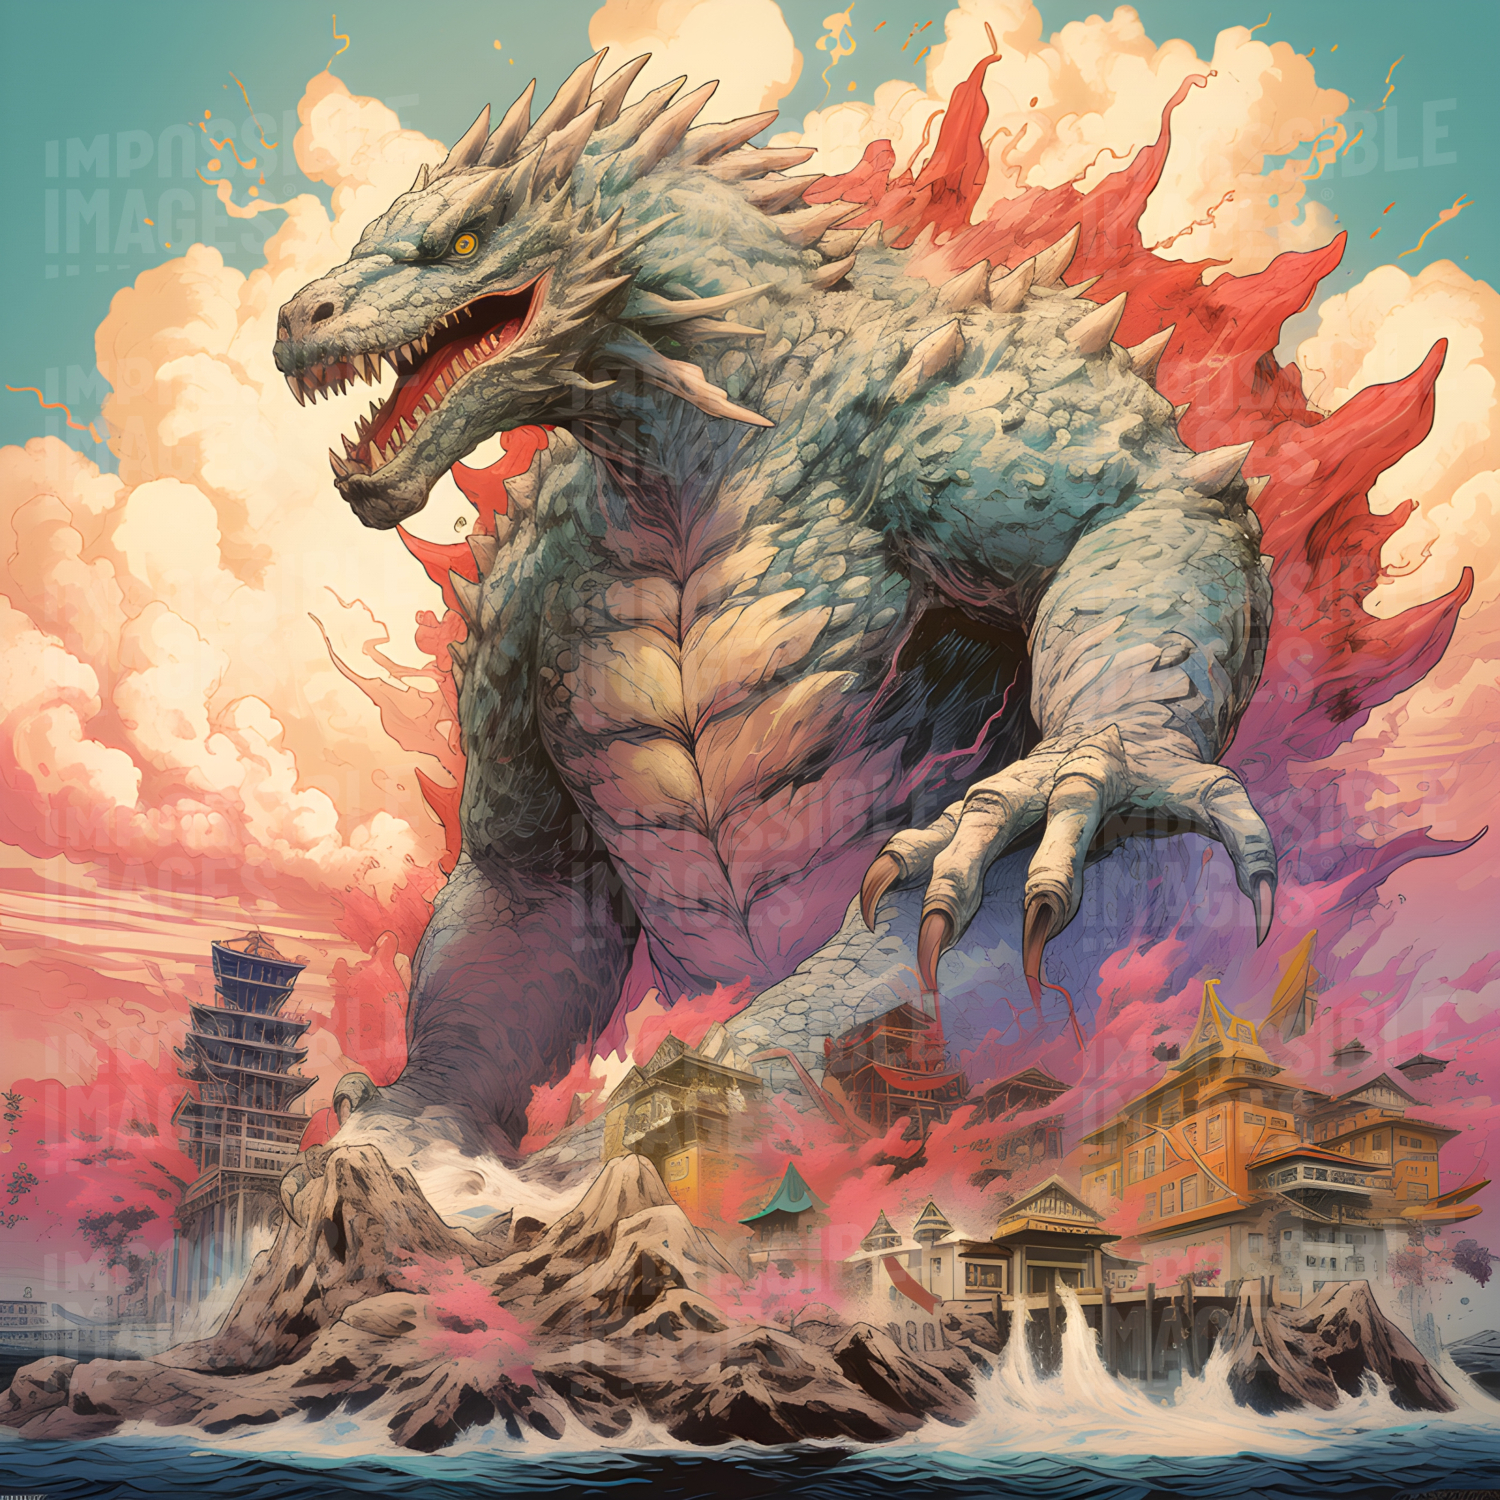 Traditional style art of a kaiju towering over a 19th century Japanese town